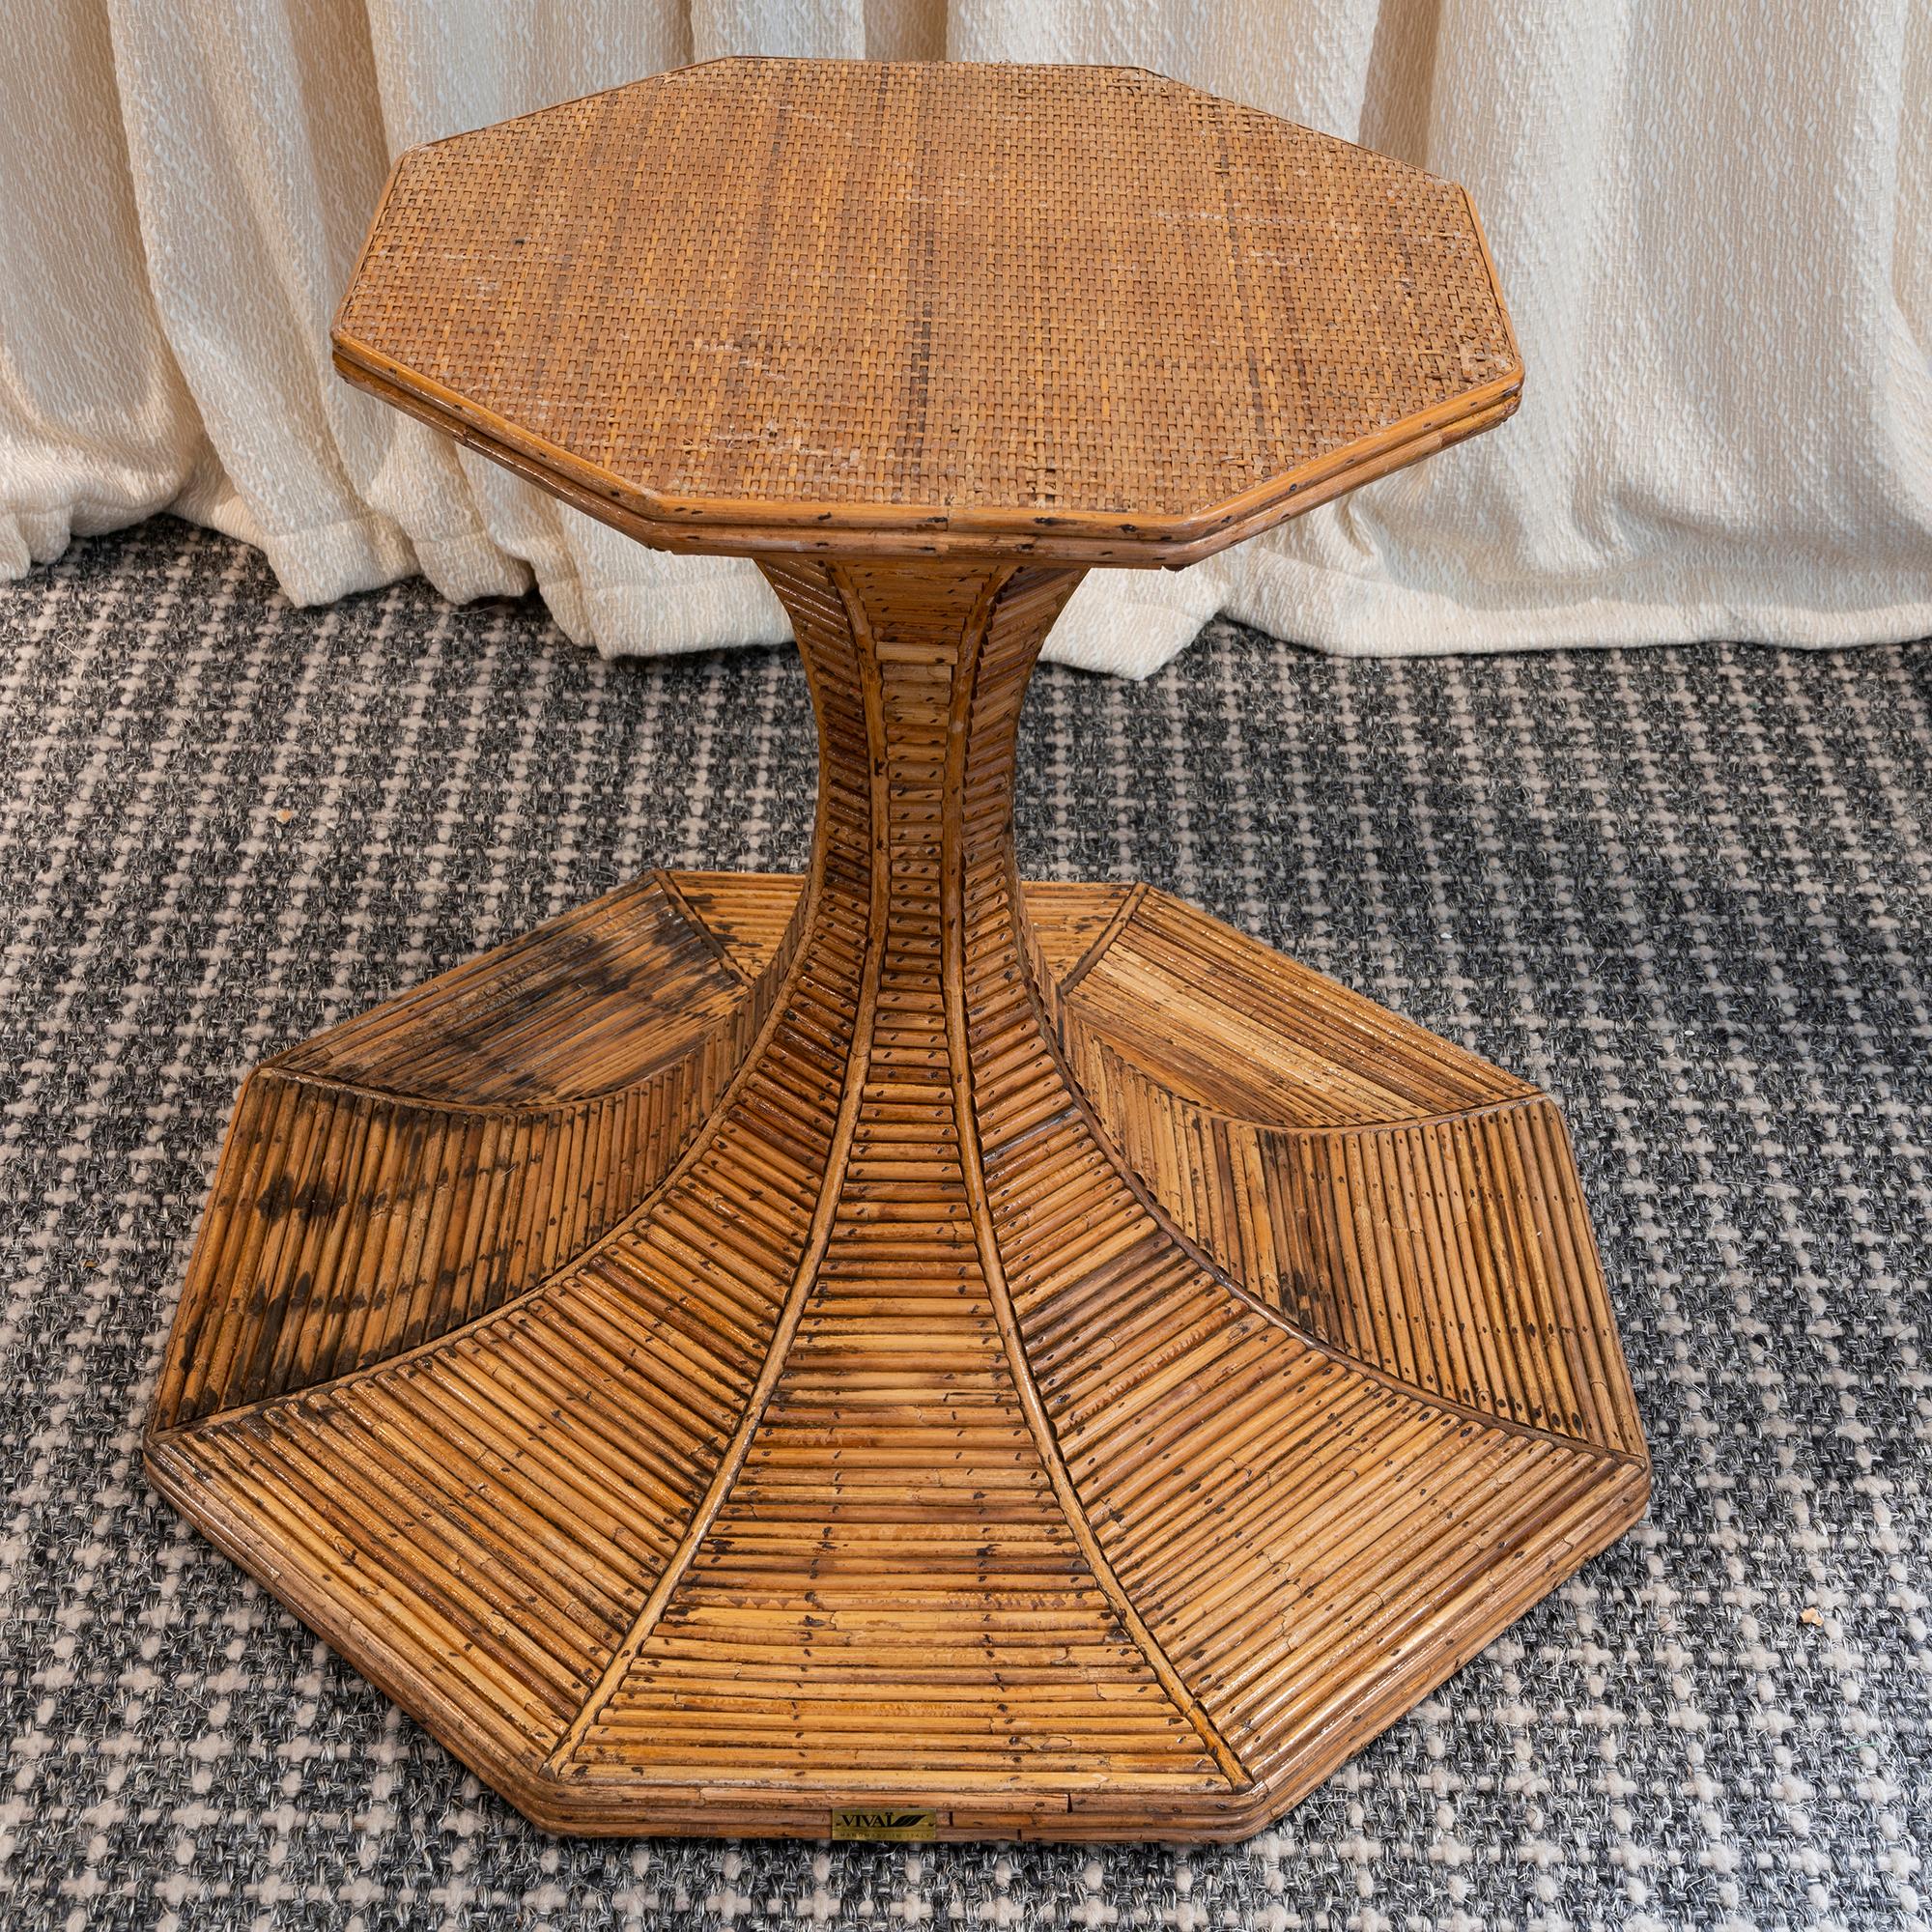 Italian 1970s Vivai del Sud Bamboo Center/Dining Table For Sale